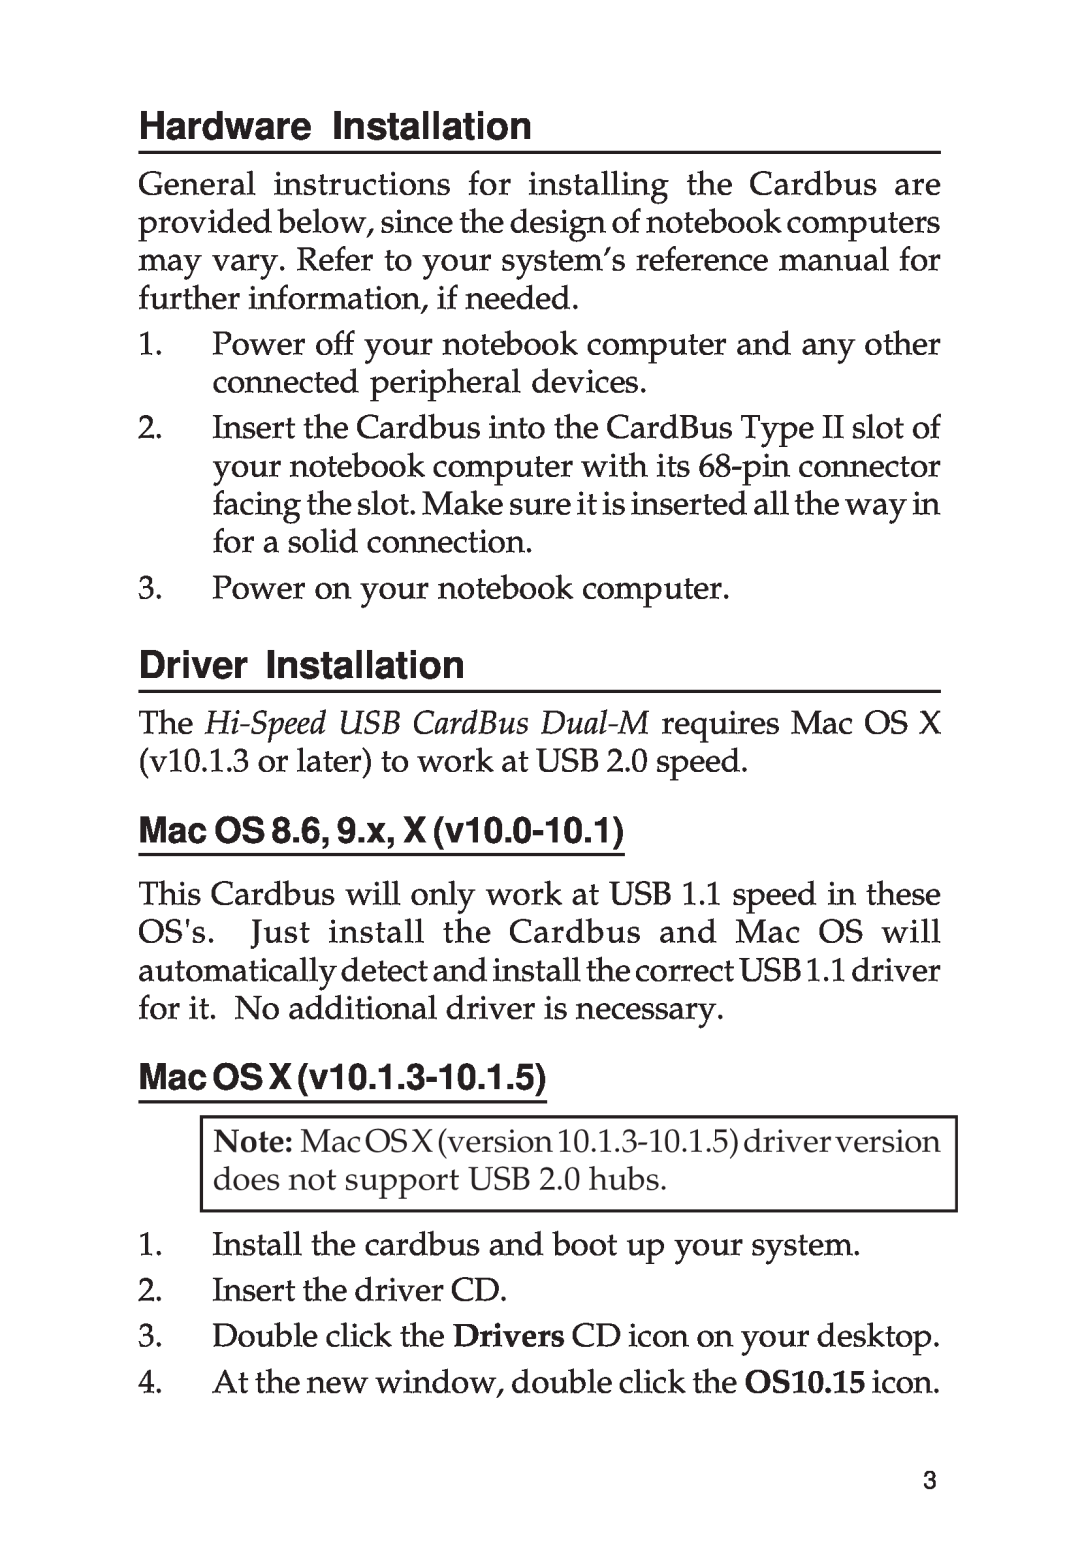 SIIG 04-0381A specifications Hardware Installation, Driver Installation, Mac OS 8.6, 9.x, X, Mac OS X 